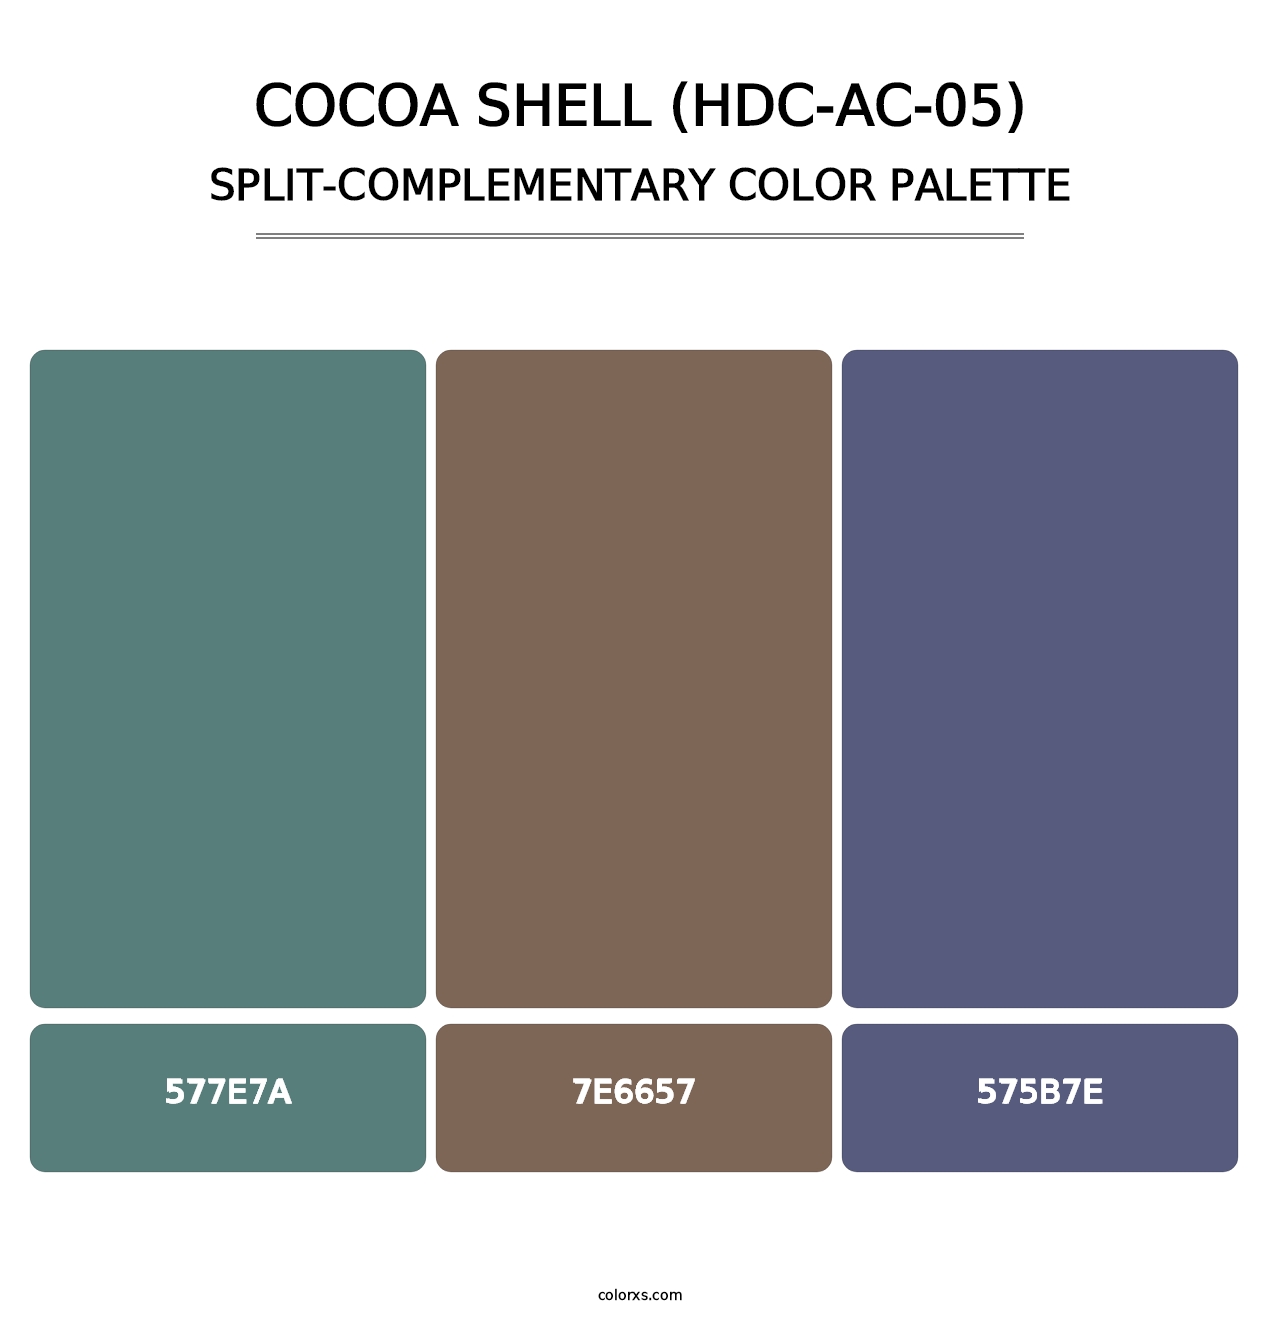 Cocoa Shell (HDC-AC-05) - Split-Complementary Color Palette